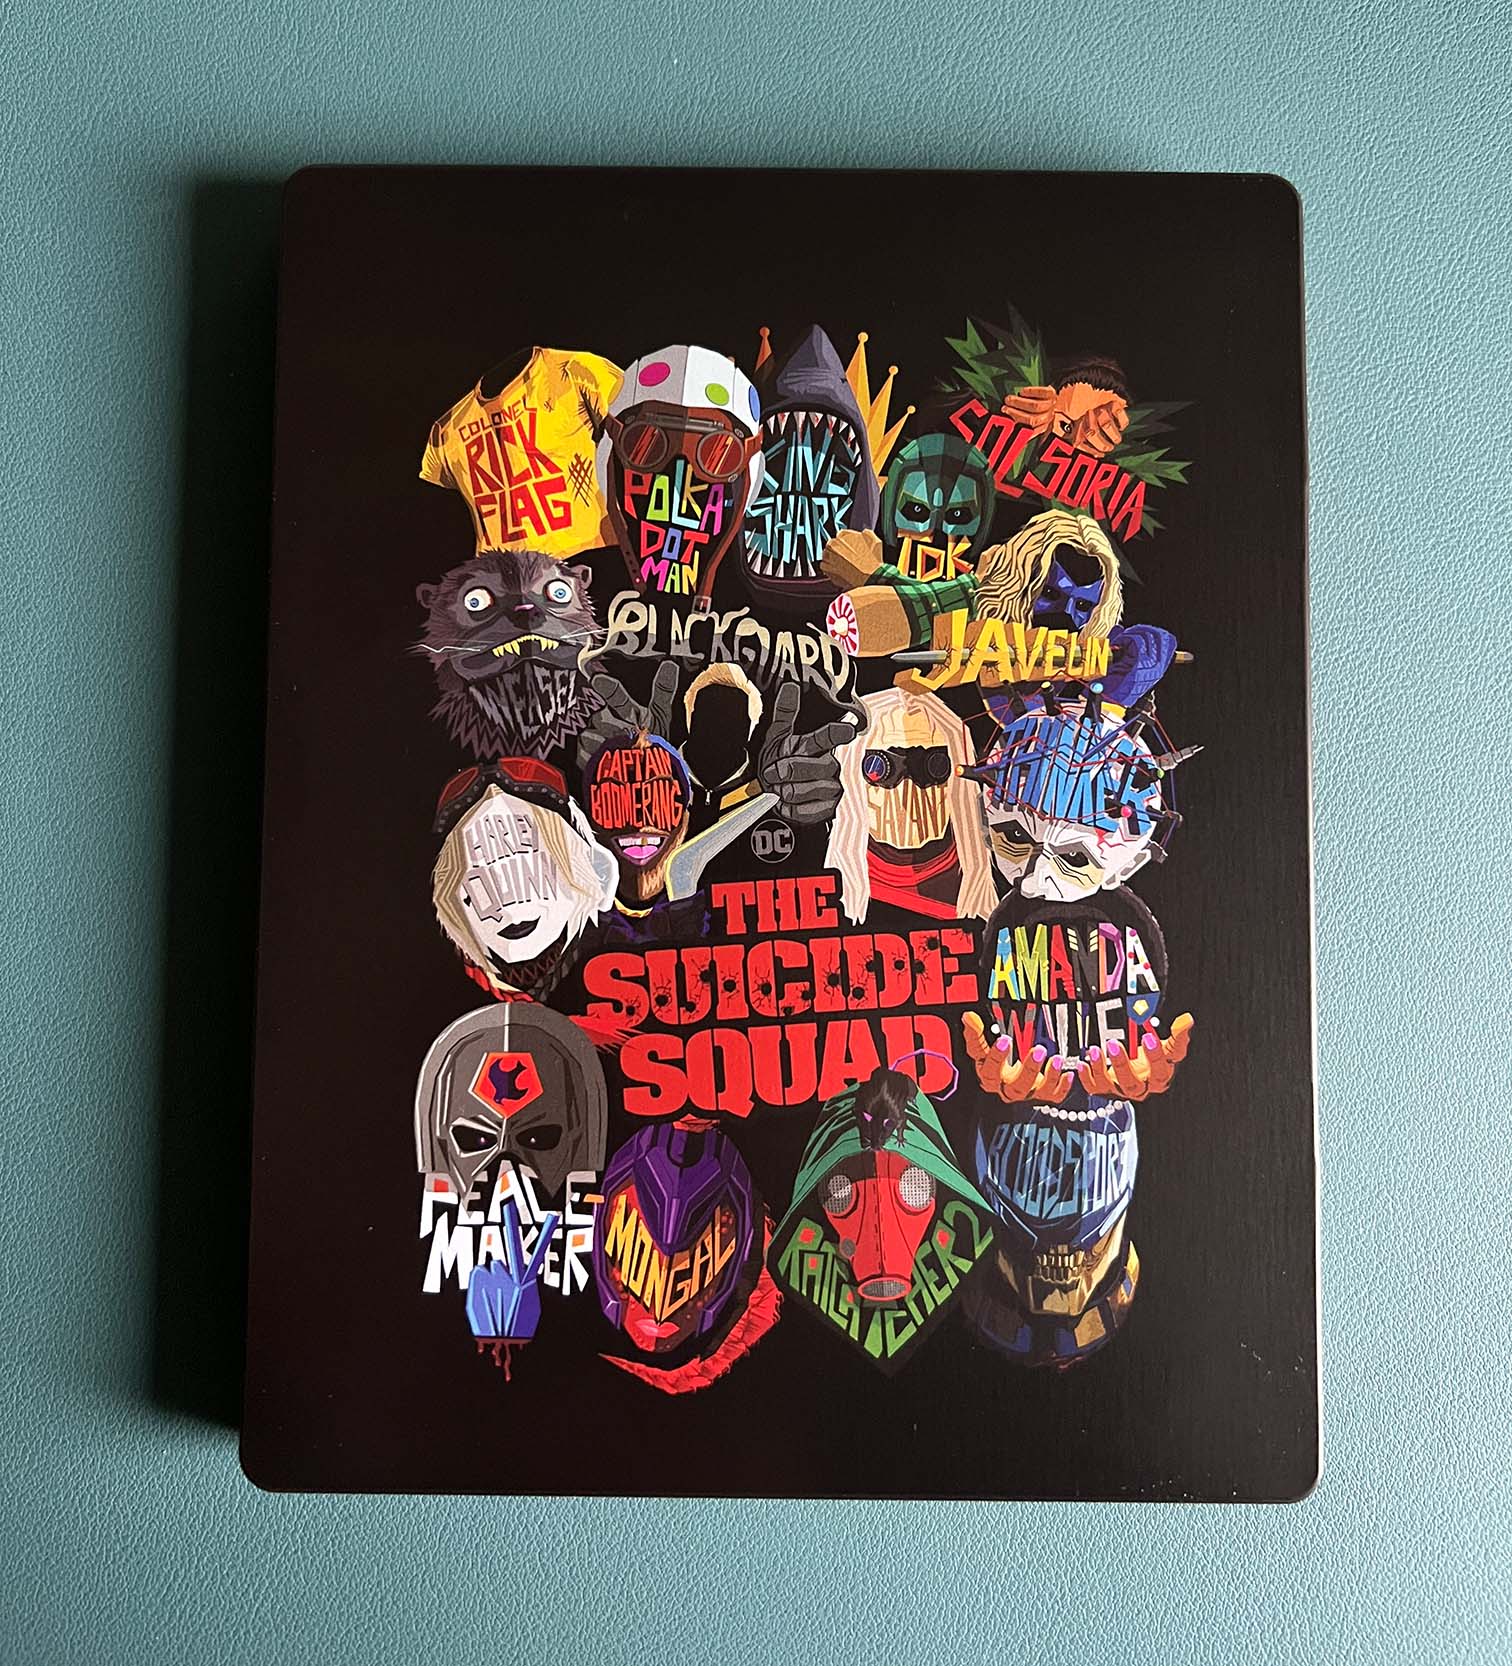 [Review] The Suicide Squad (2021) 4K UHD Steelbook (inkl. Blu-Ray)